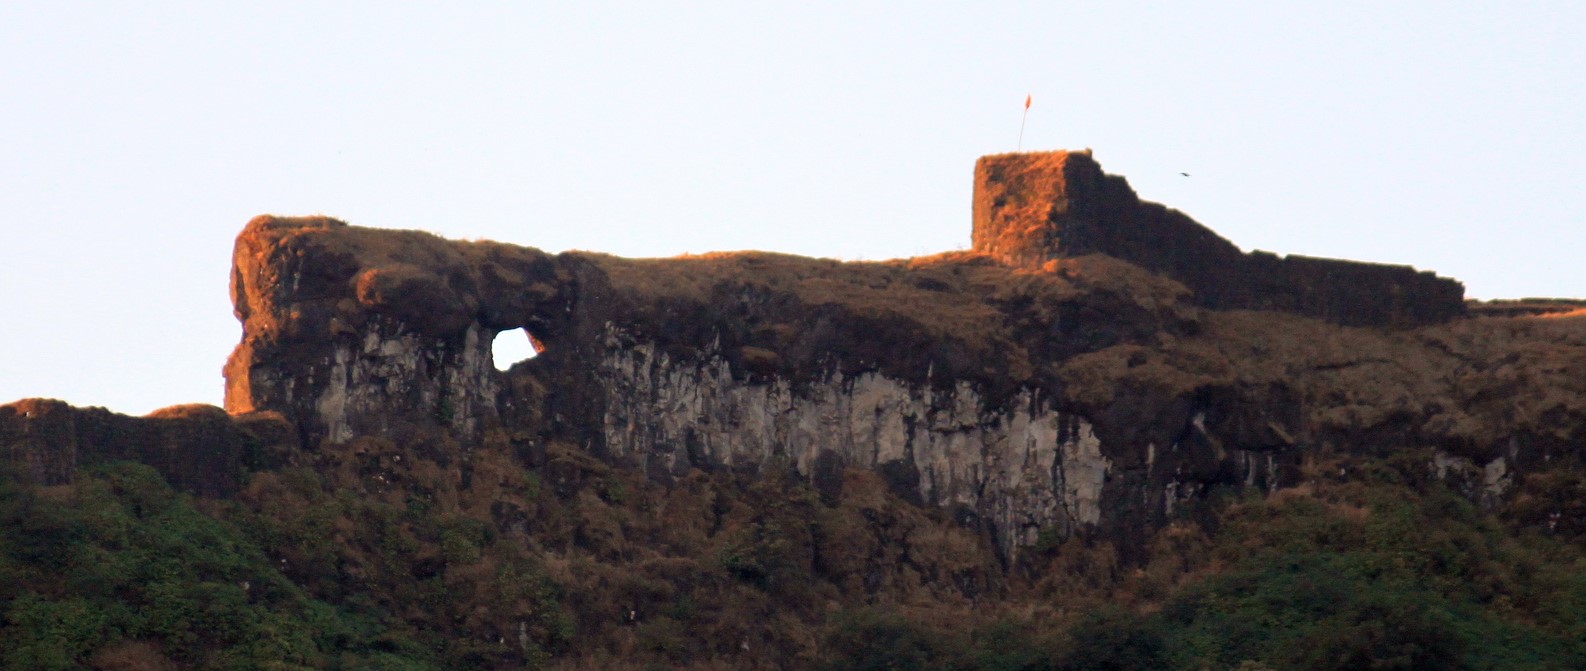 Don't miss to see this naturally formed beauty on Rajgad, which u can locate even from the road, while on your way to Nisargshala. Keep looking to left mountain range once you leave NH4 and head toward Velhe.